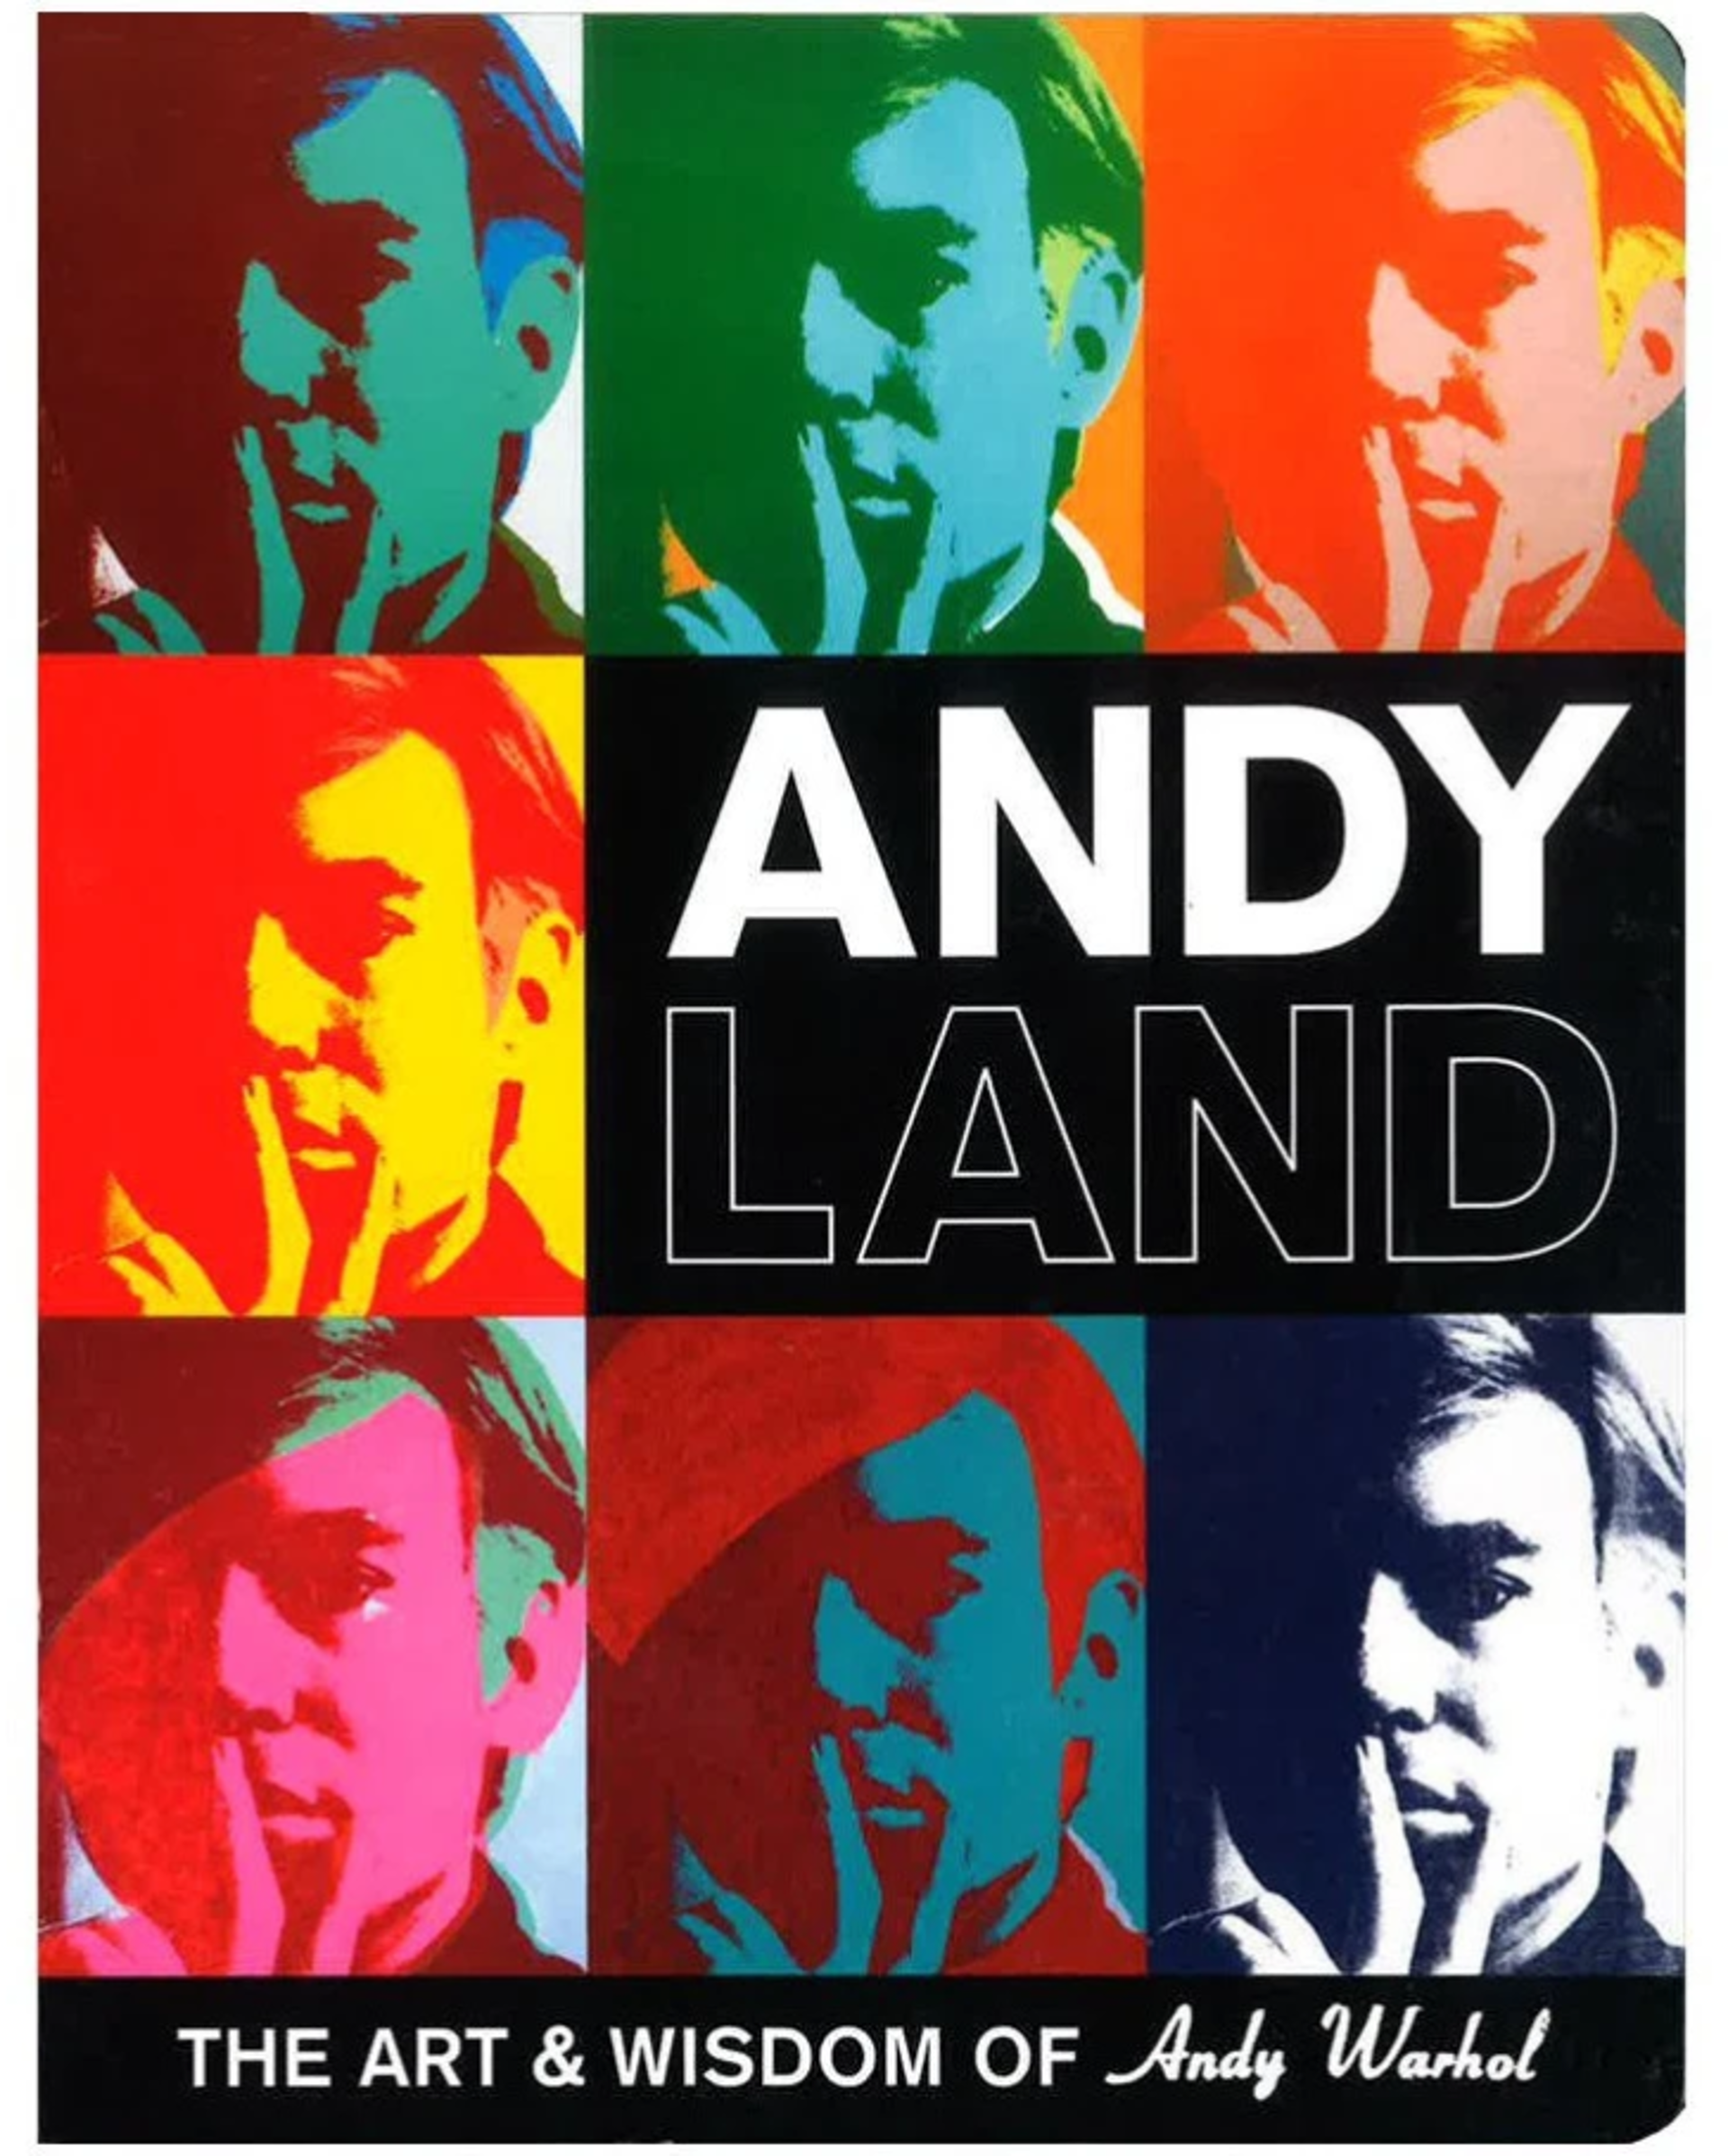 Andyland by Andy Warhol